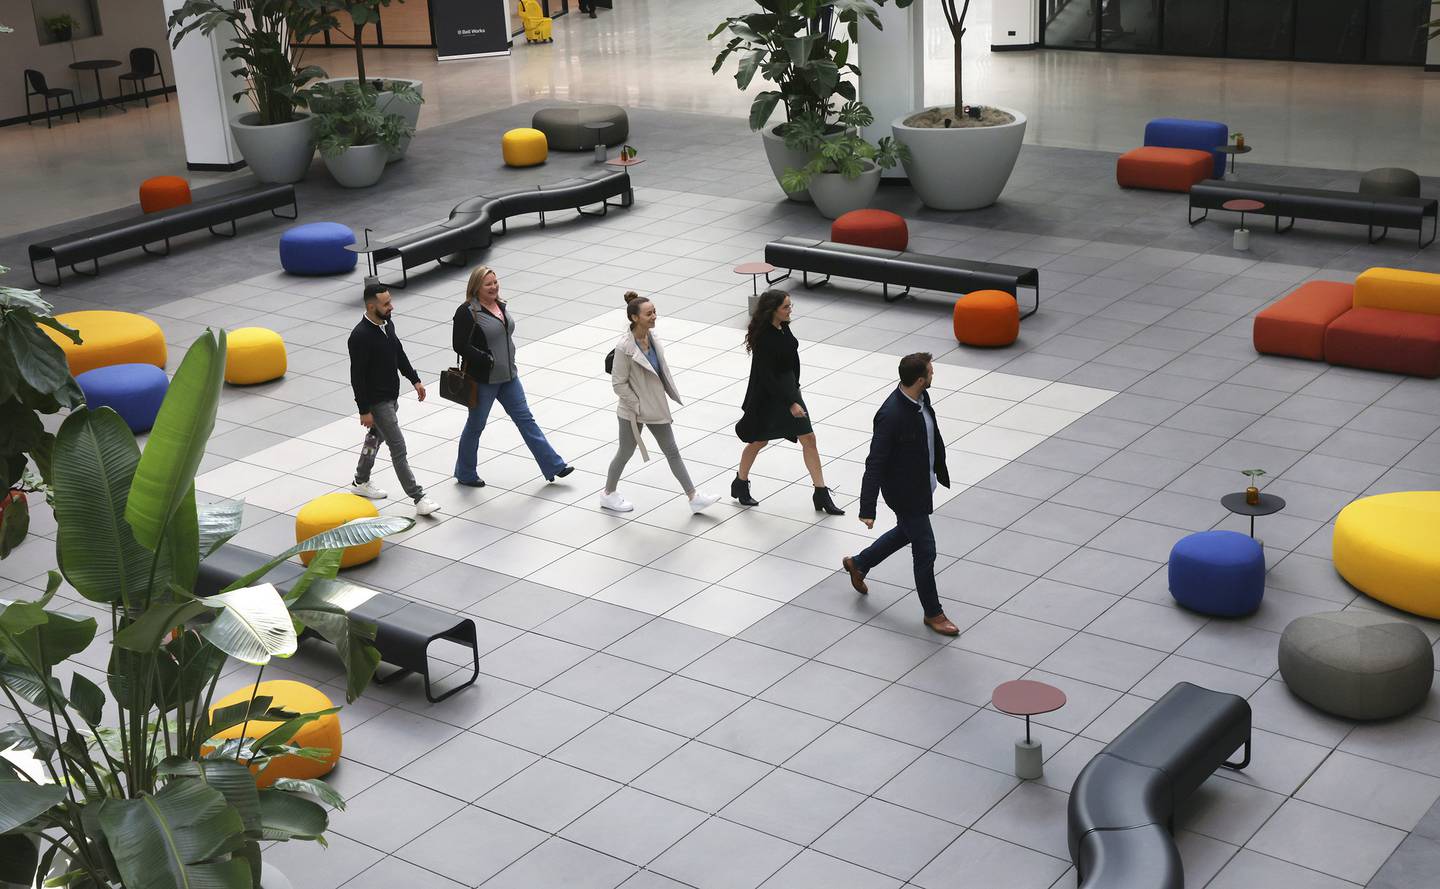 People walk through the central square at Bell Works Chicagoland in Hoffman Estates. The square is a tall, airy space decorated with brightly colored Italian furniture. 